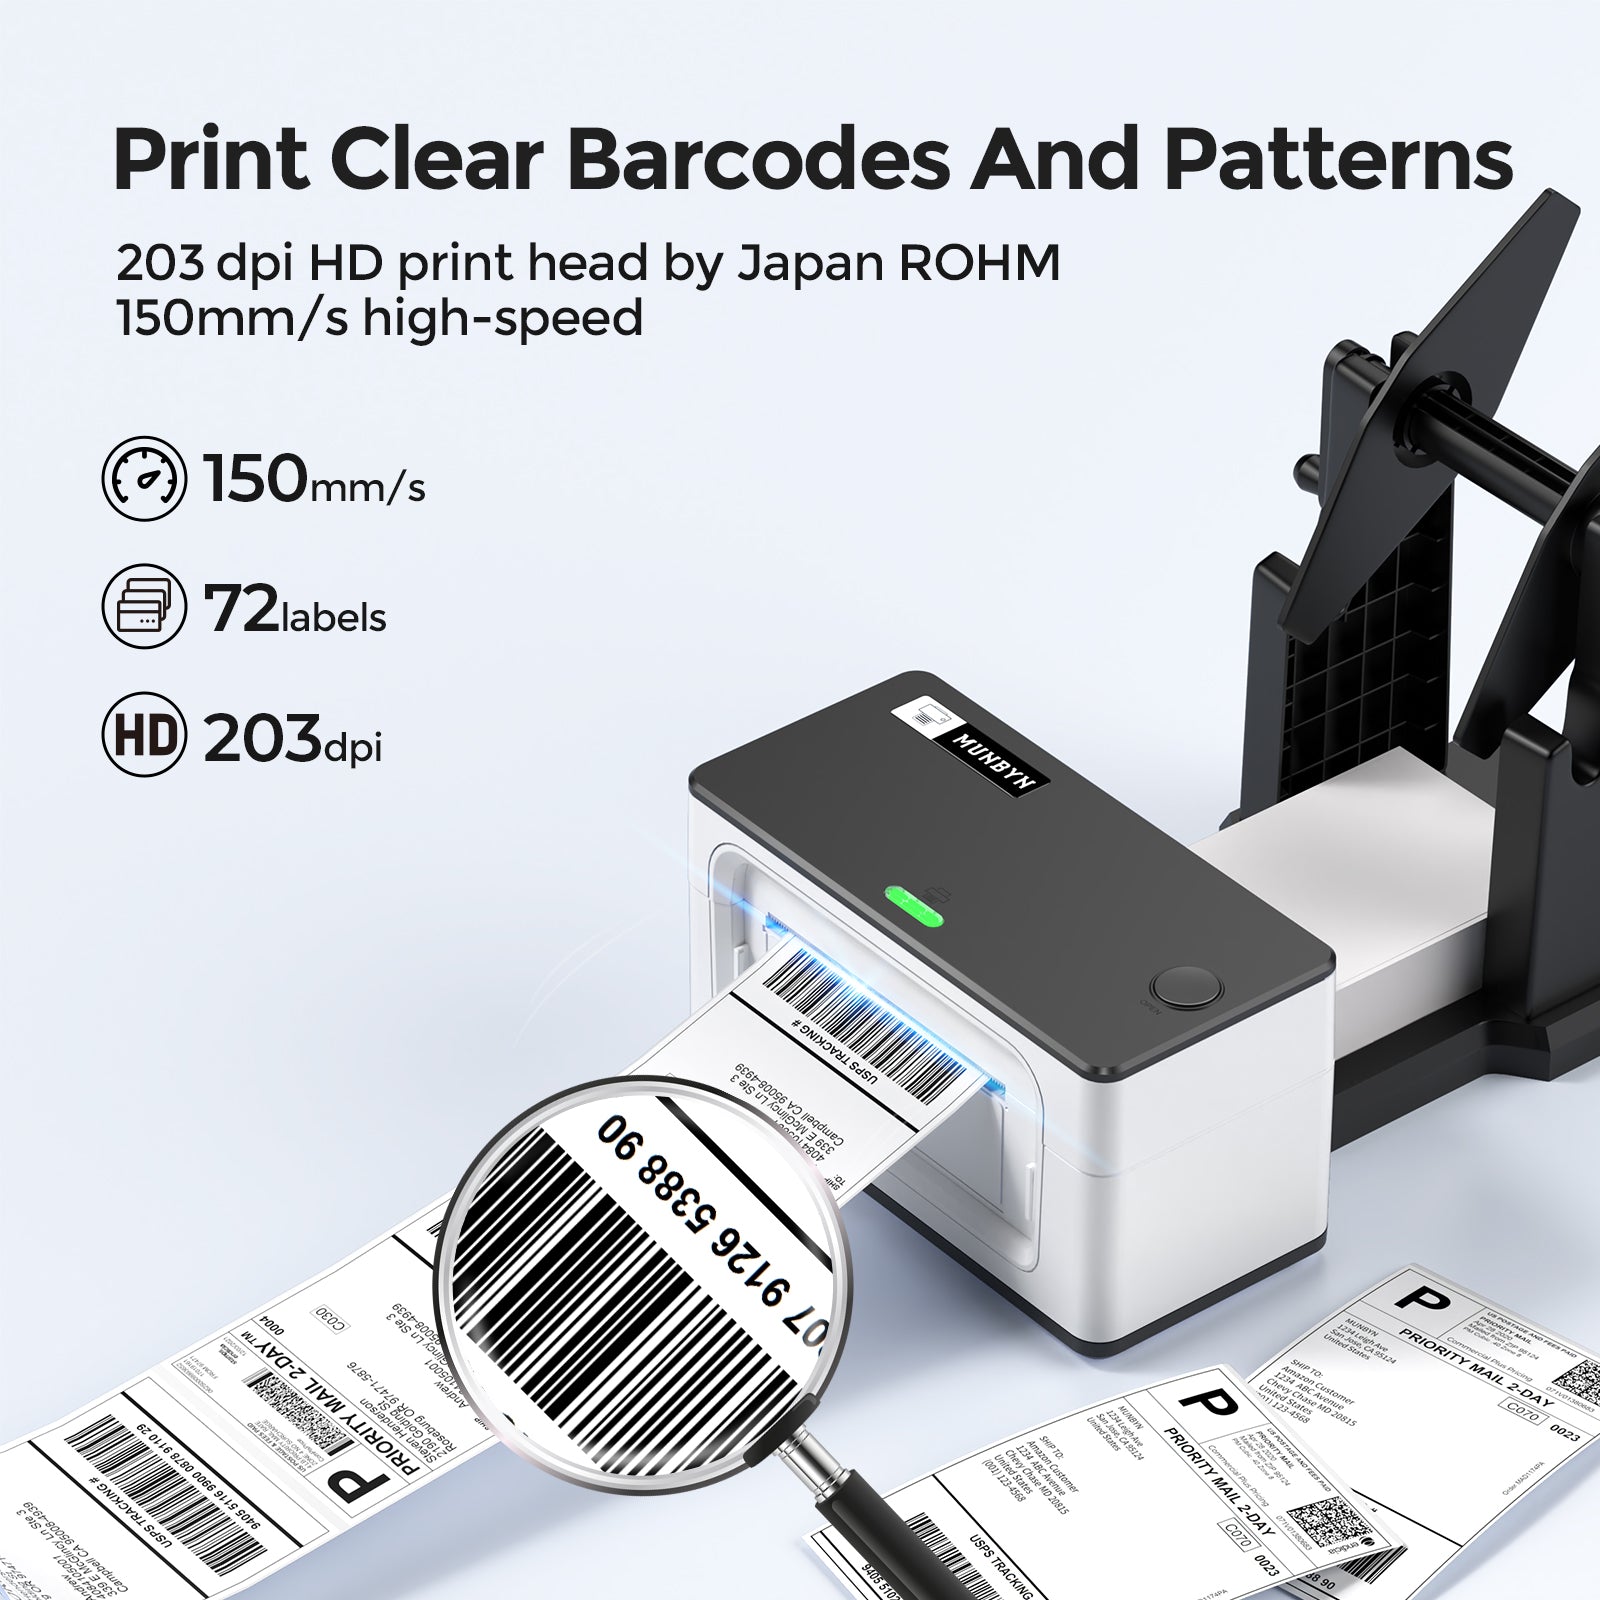 MUNBYN ITPP941 thermal label printer is 203dpi and can print at a speed of 150mm/s.